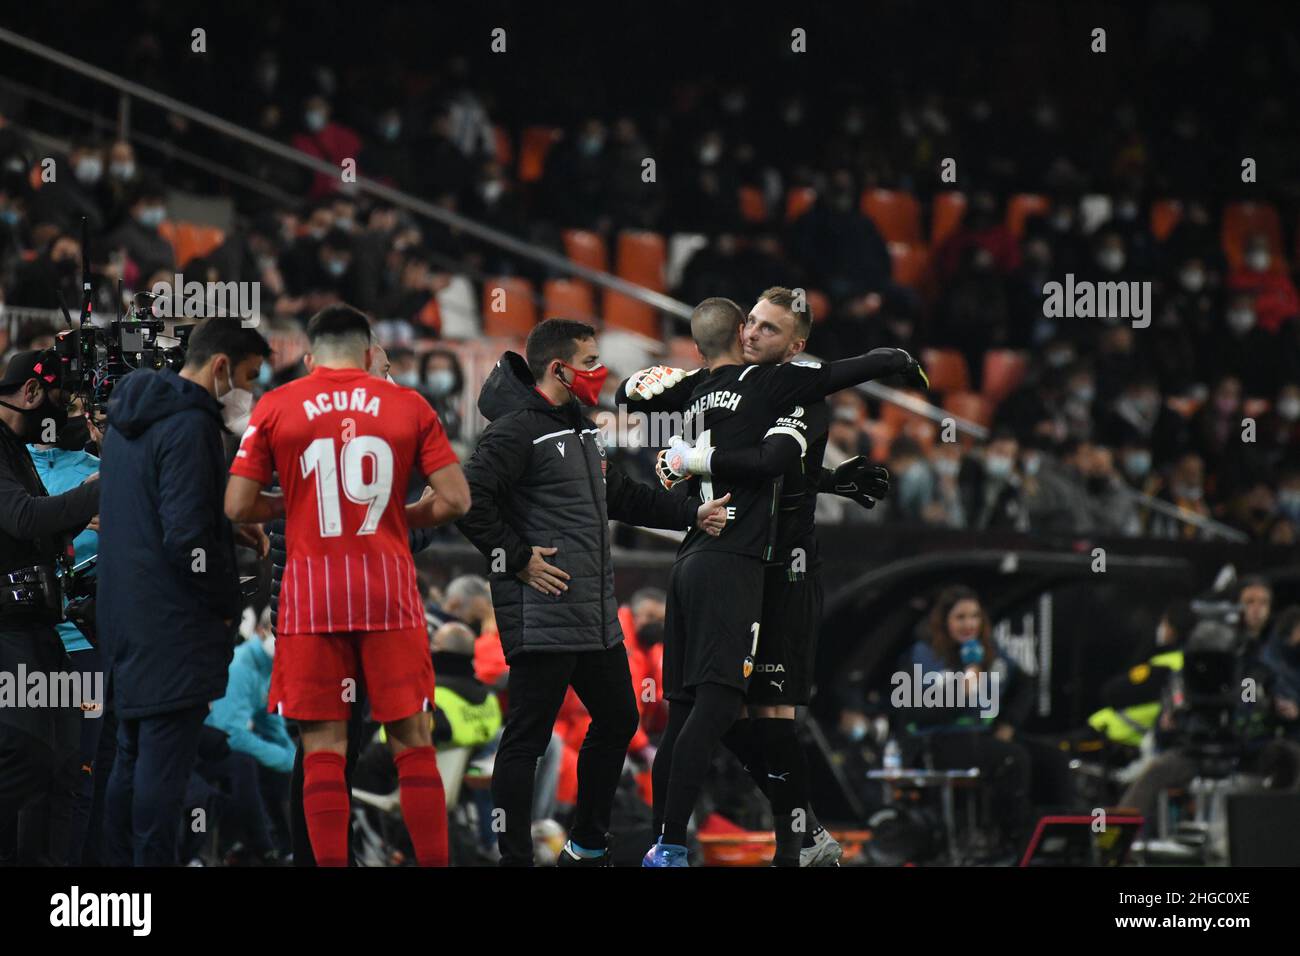 VALENCIA - JANUARY 19: Jasper Cillessen of Valencia was substituted by Jaume Doménech during the La Liga match between Valencia and Sevilla at Mestalla Stadium on January 19, 2022 in Valencia, Spain. (Photo by Sara Aribó/PxImages) Credit: Px Images/Alamy Live News Stock Photo